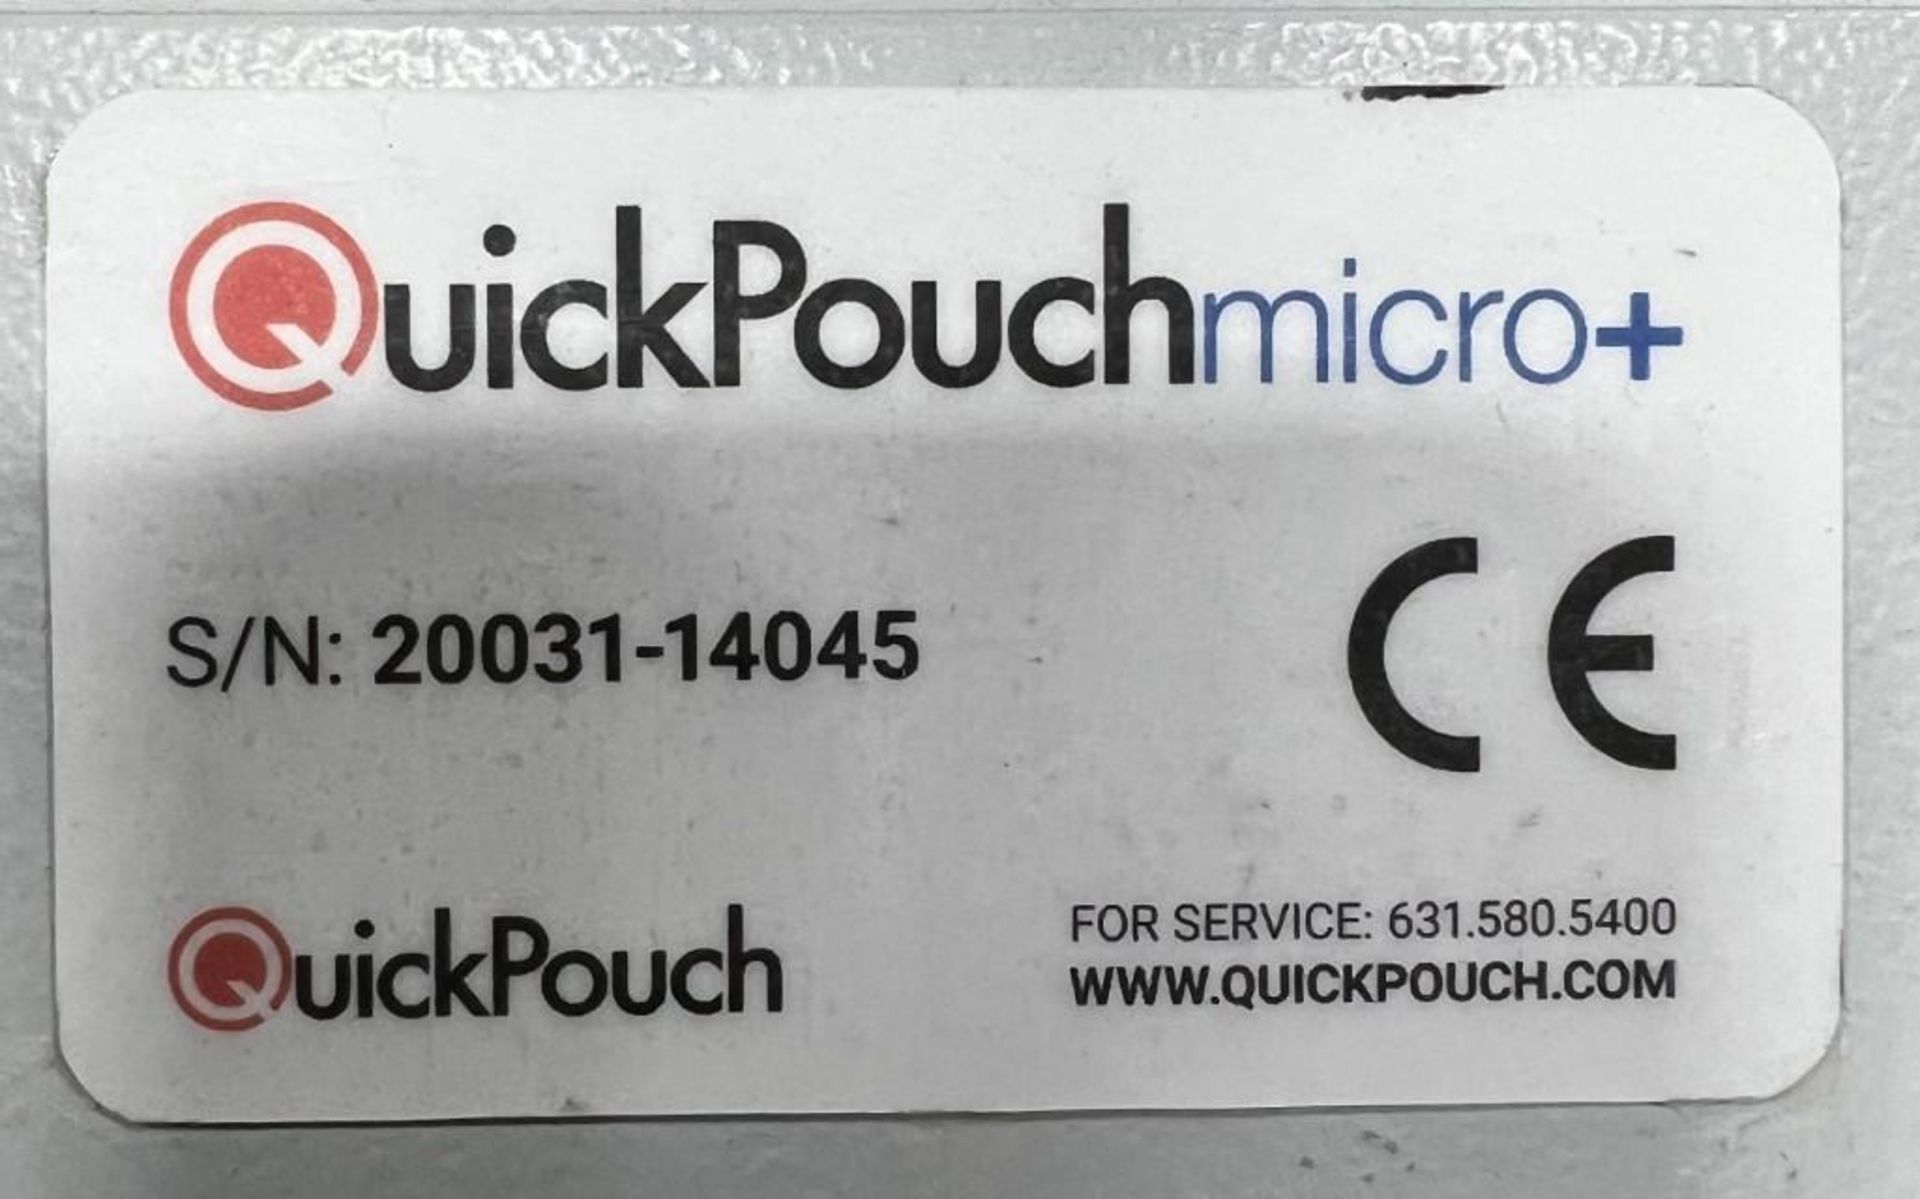 QuickPouch Micro+ Desktop Pouch Opener. Serial# 20031-14045. - Image 6 of 6